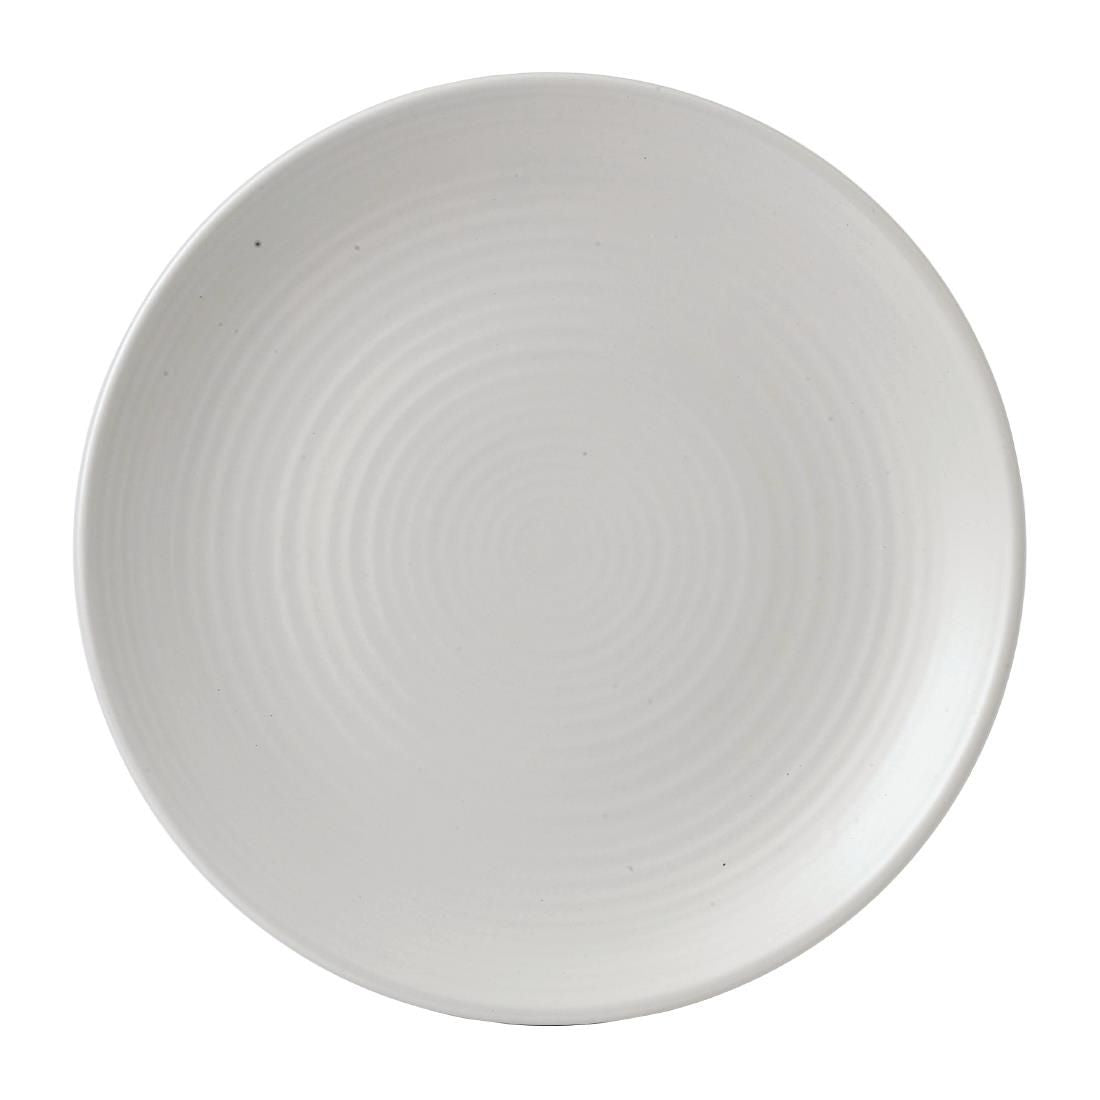 FE339 Dudson Evo Pearl Coupe Plate 273mm (Pack of 6) JD Catering Equipment Solutions Ltd